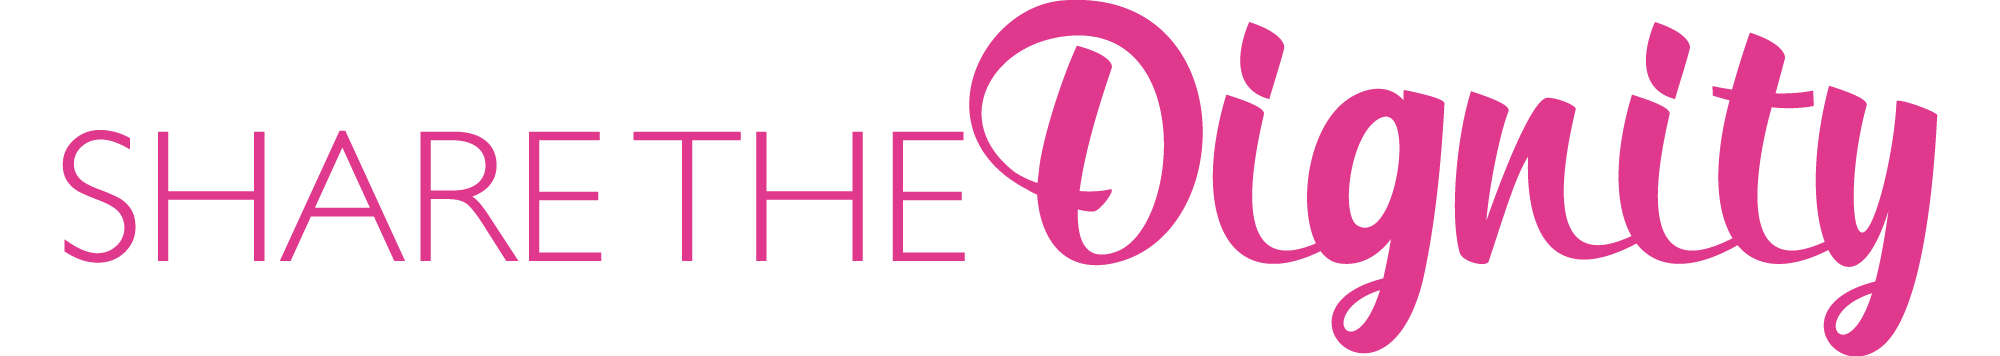 Share the Dignity Logo Pink